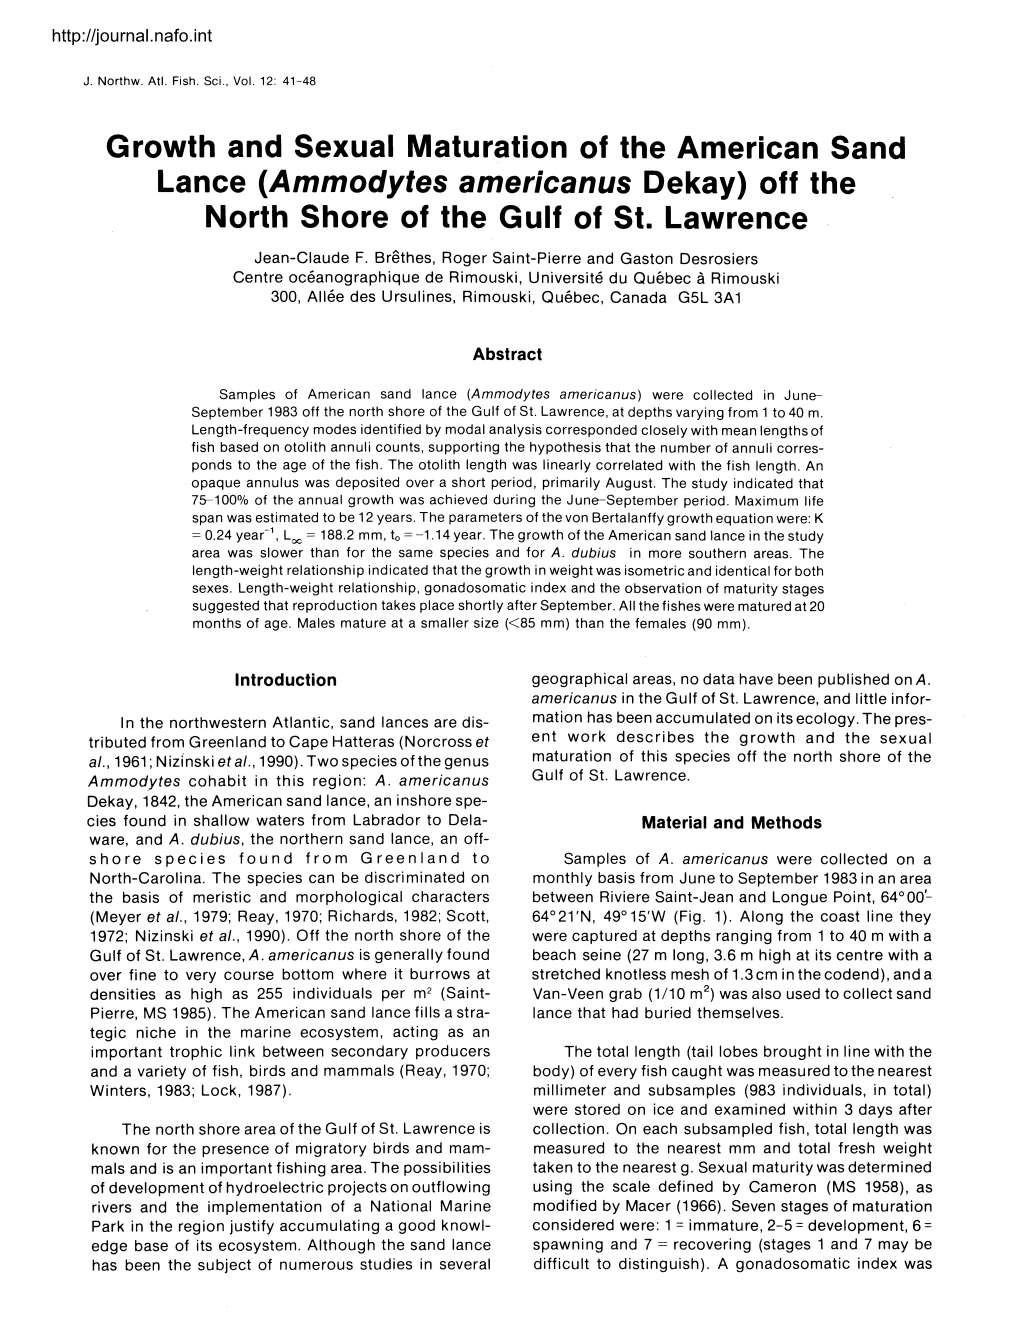 Growth and Sexual Maturation of the American Sand Lance (Ammodytes Americanus Dekay) Off the North Shore of the Gulf of St